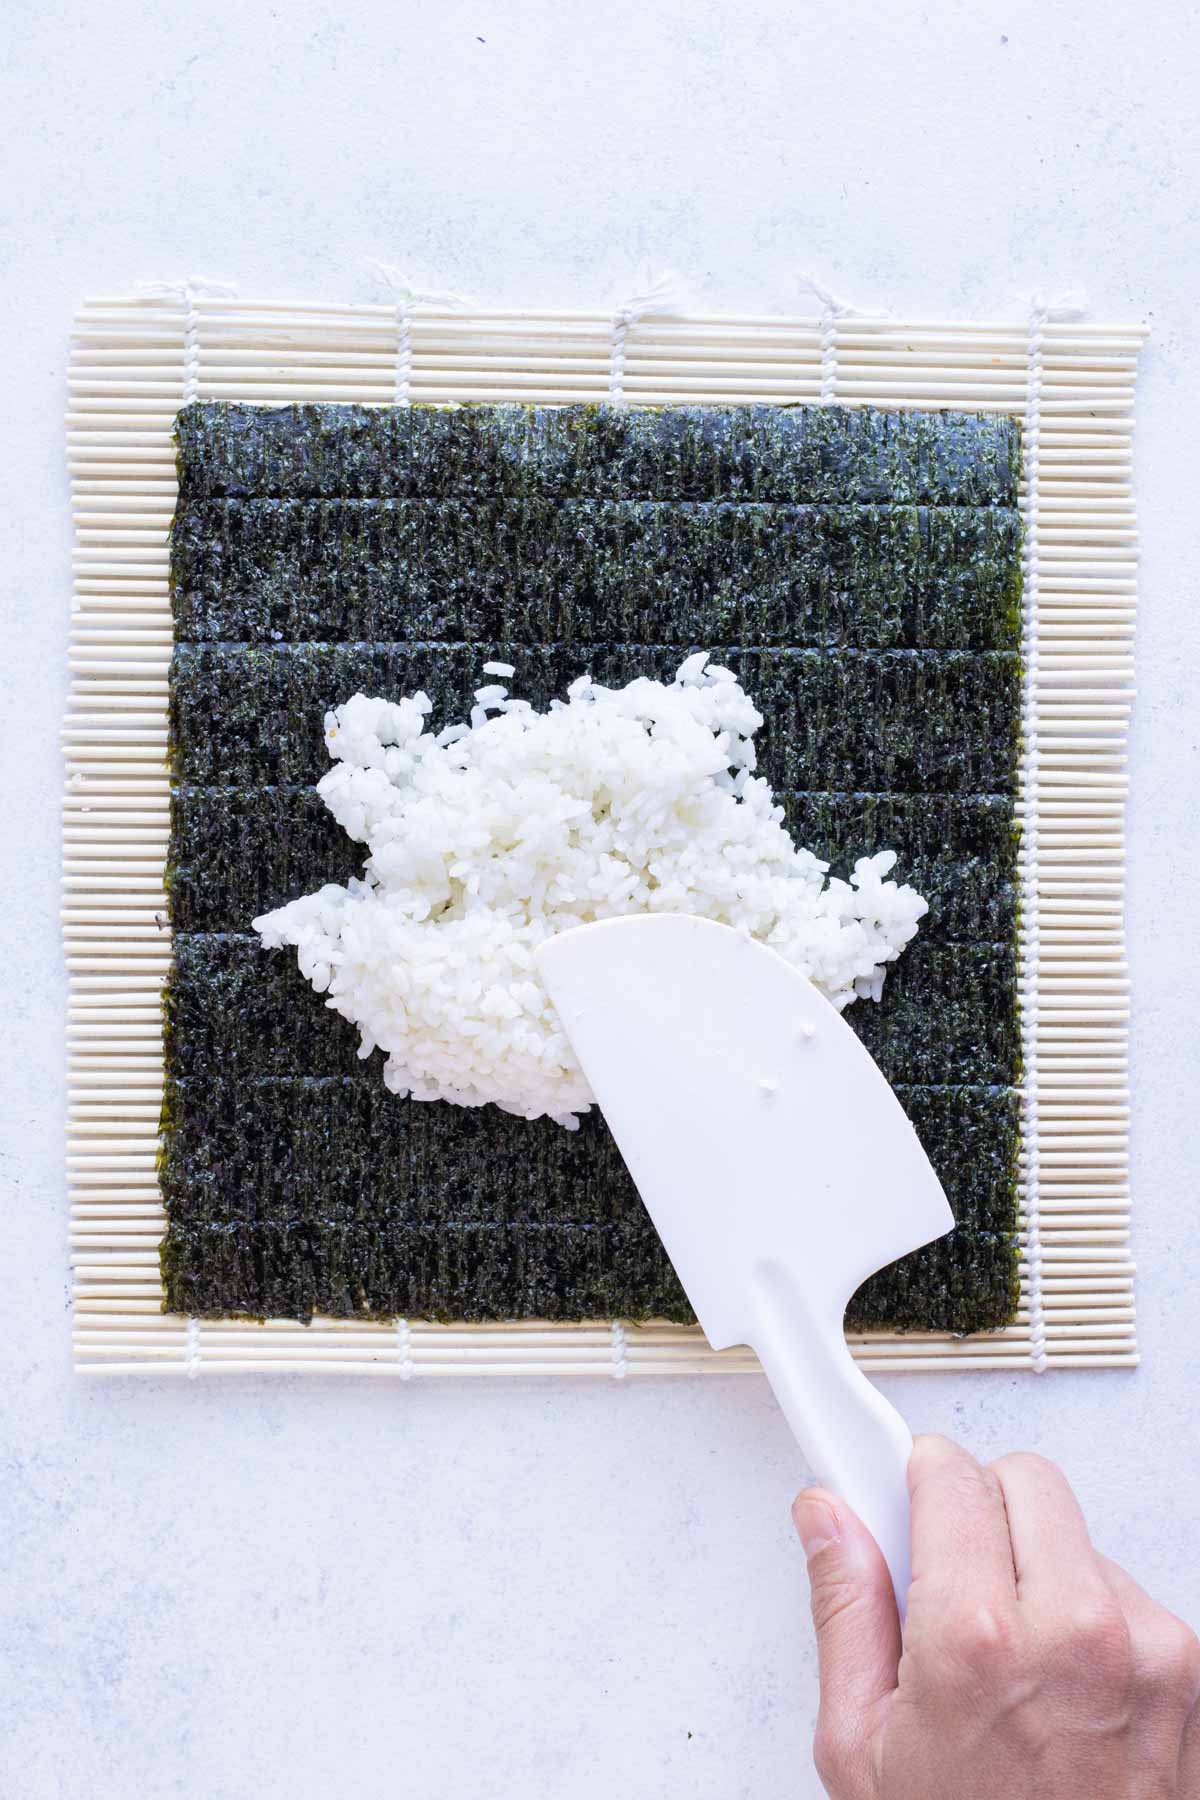 Rice is spread across the nori on a bamboo mat.